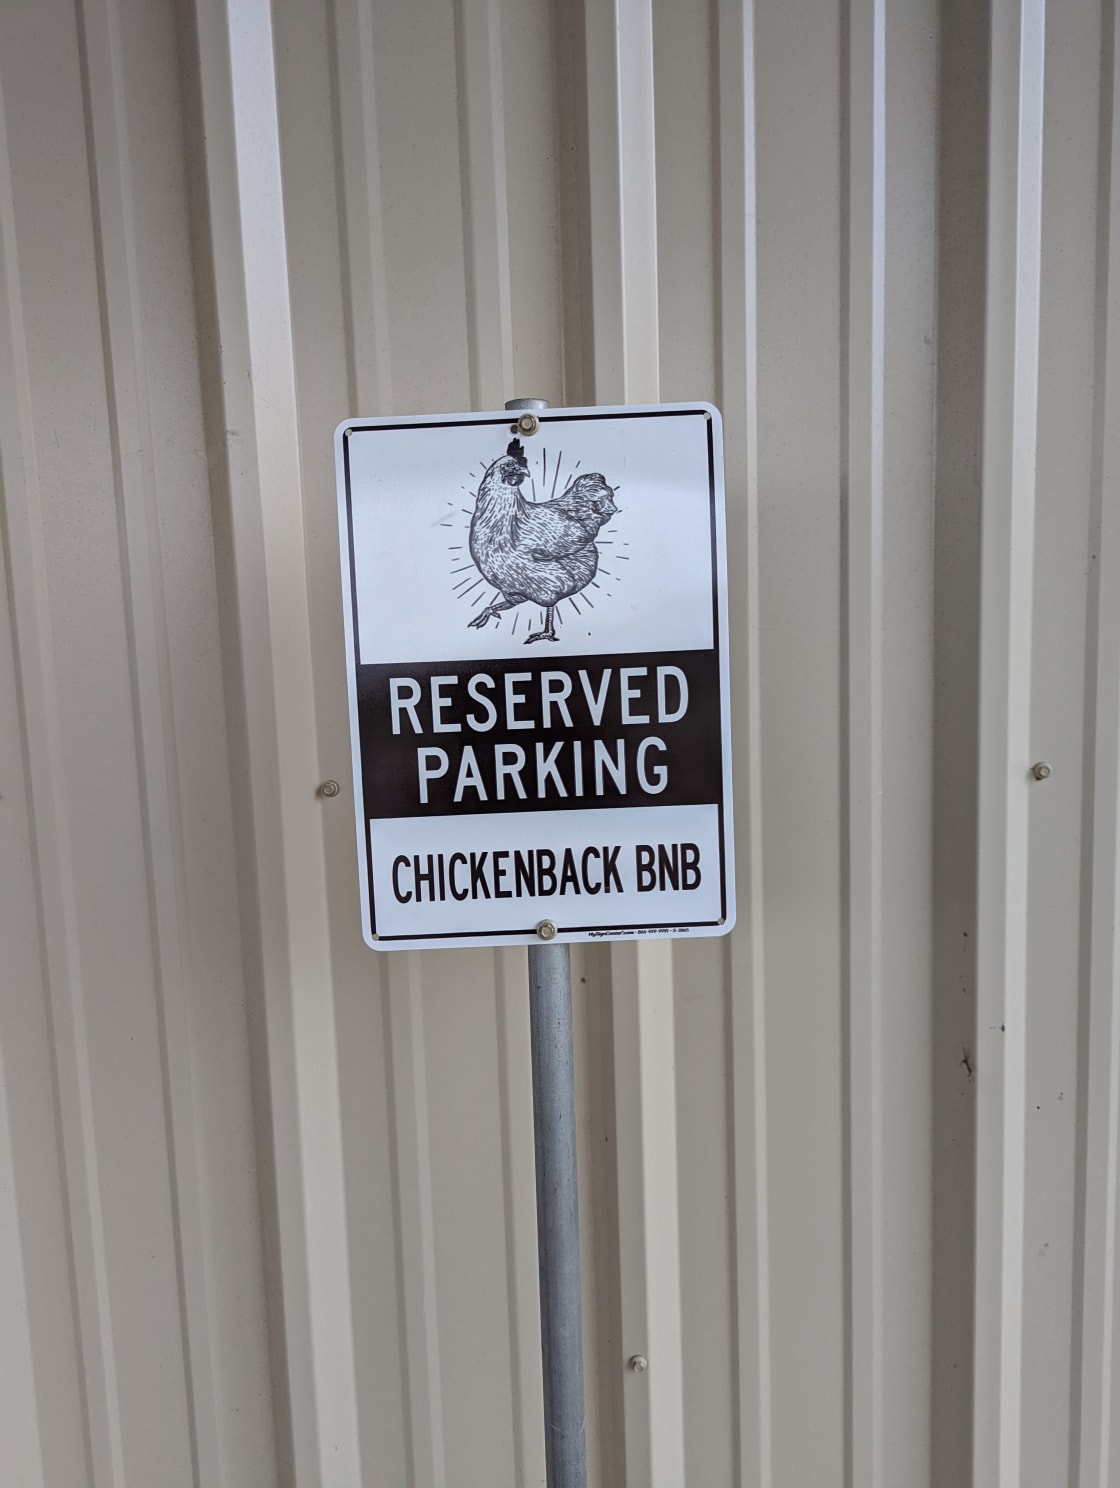 Reserved parking in front of the shop and camper is to the right (west side). Allows for sneaking in under the radar of resident chickens. 